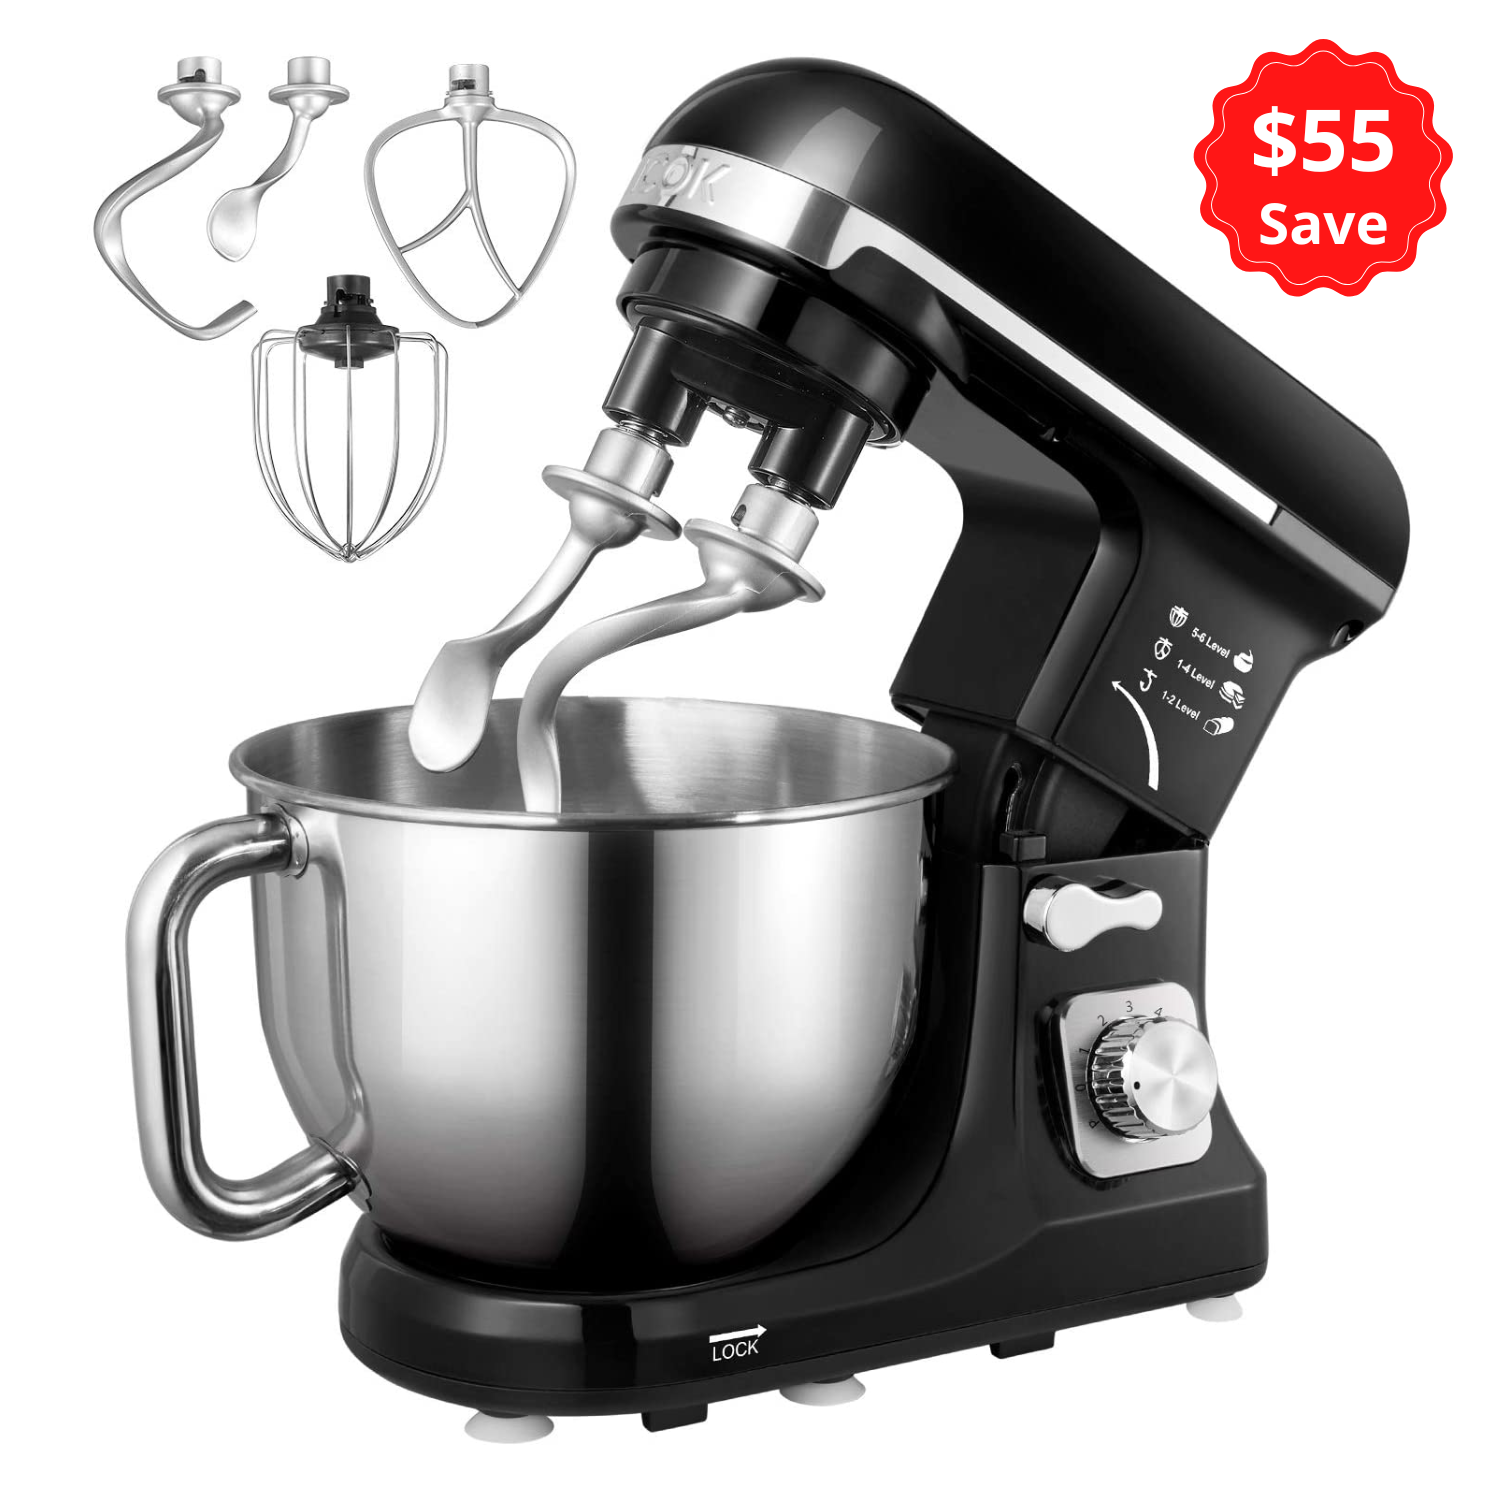 Intelligent Cooking Machine Home Multifunction Stand Mixer